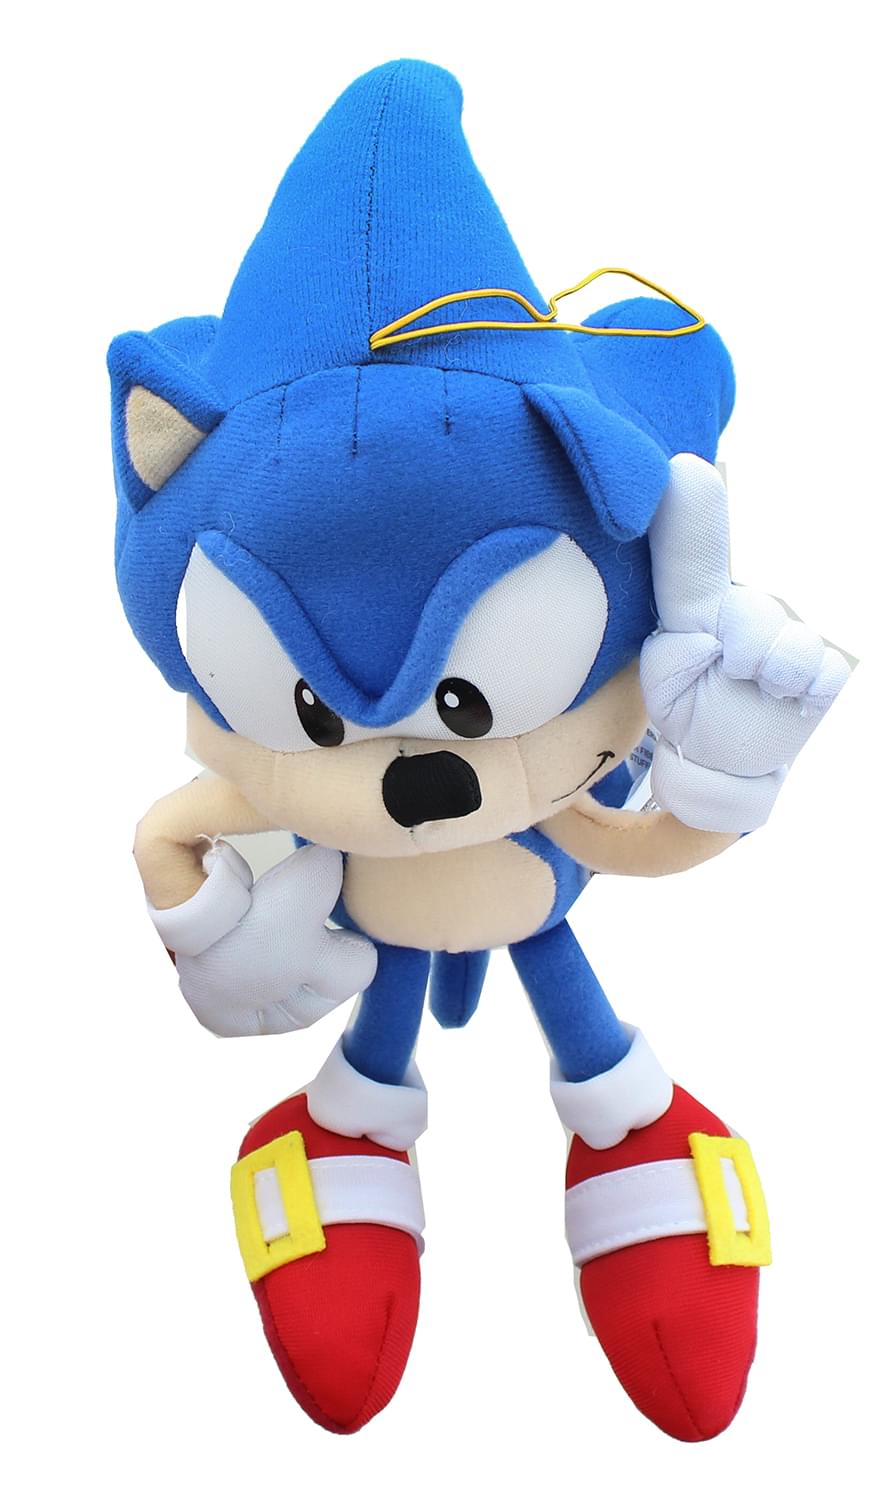 Photos - Soft Toy Sonic the Hedgehog 9 Inch Collectible Plush GEE-7088-C